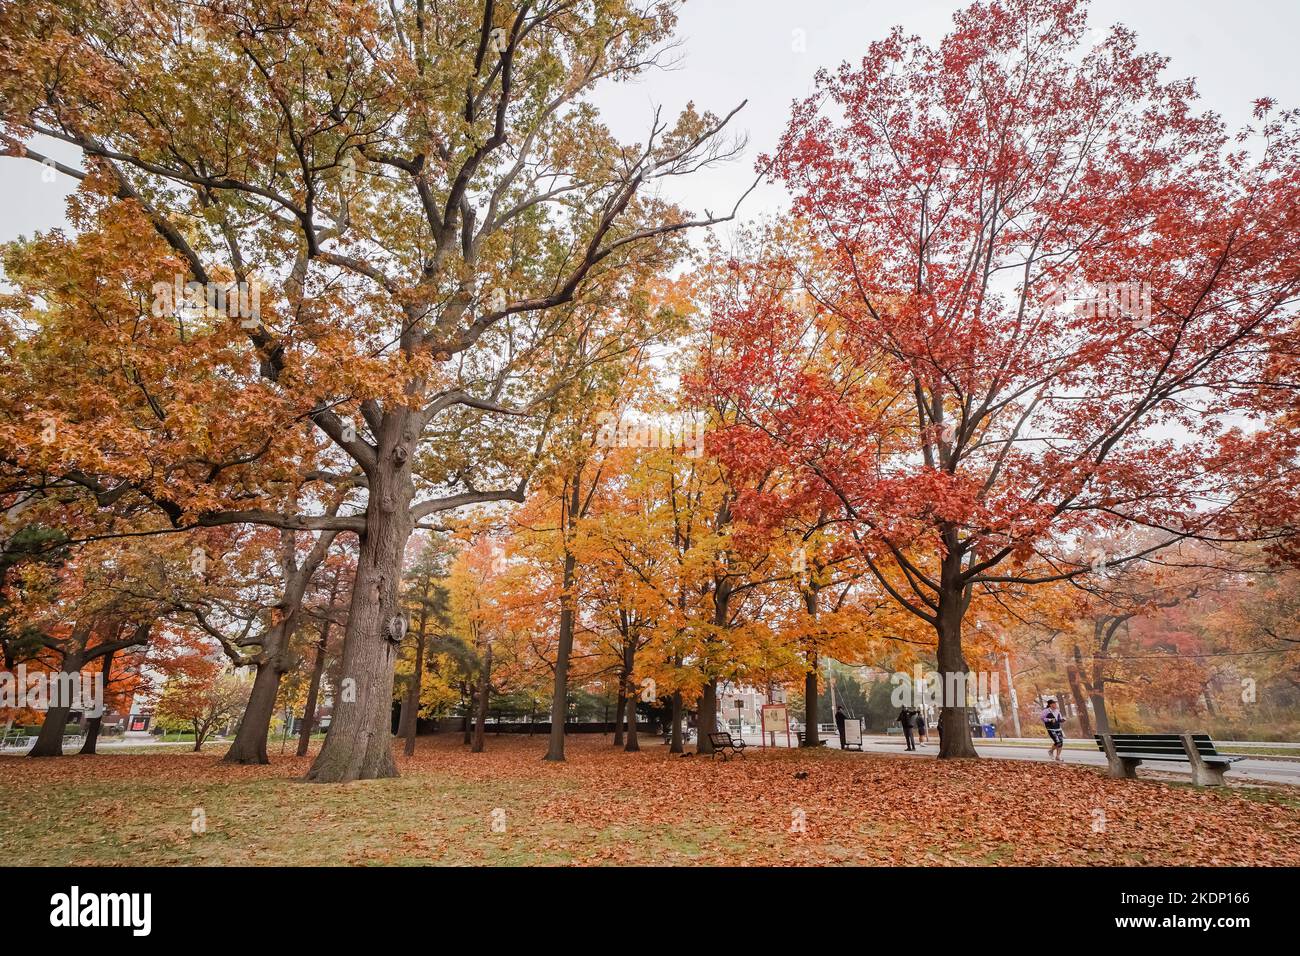 Large standing trees yellow orange red colors fallen leafs at a park Stock Photo